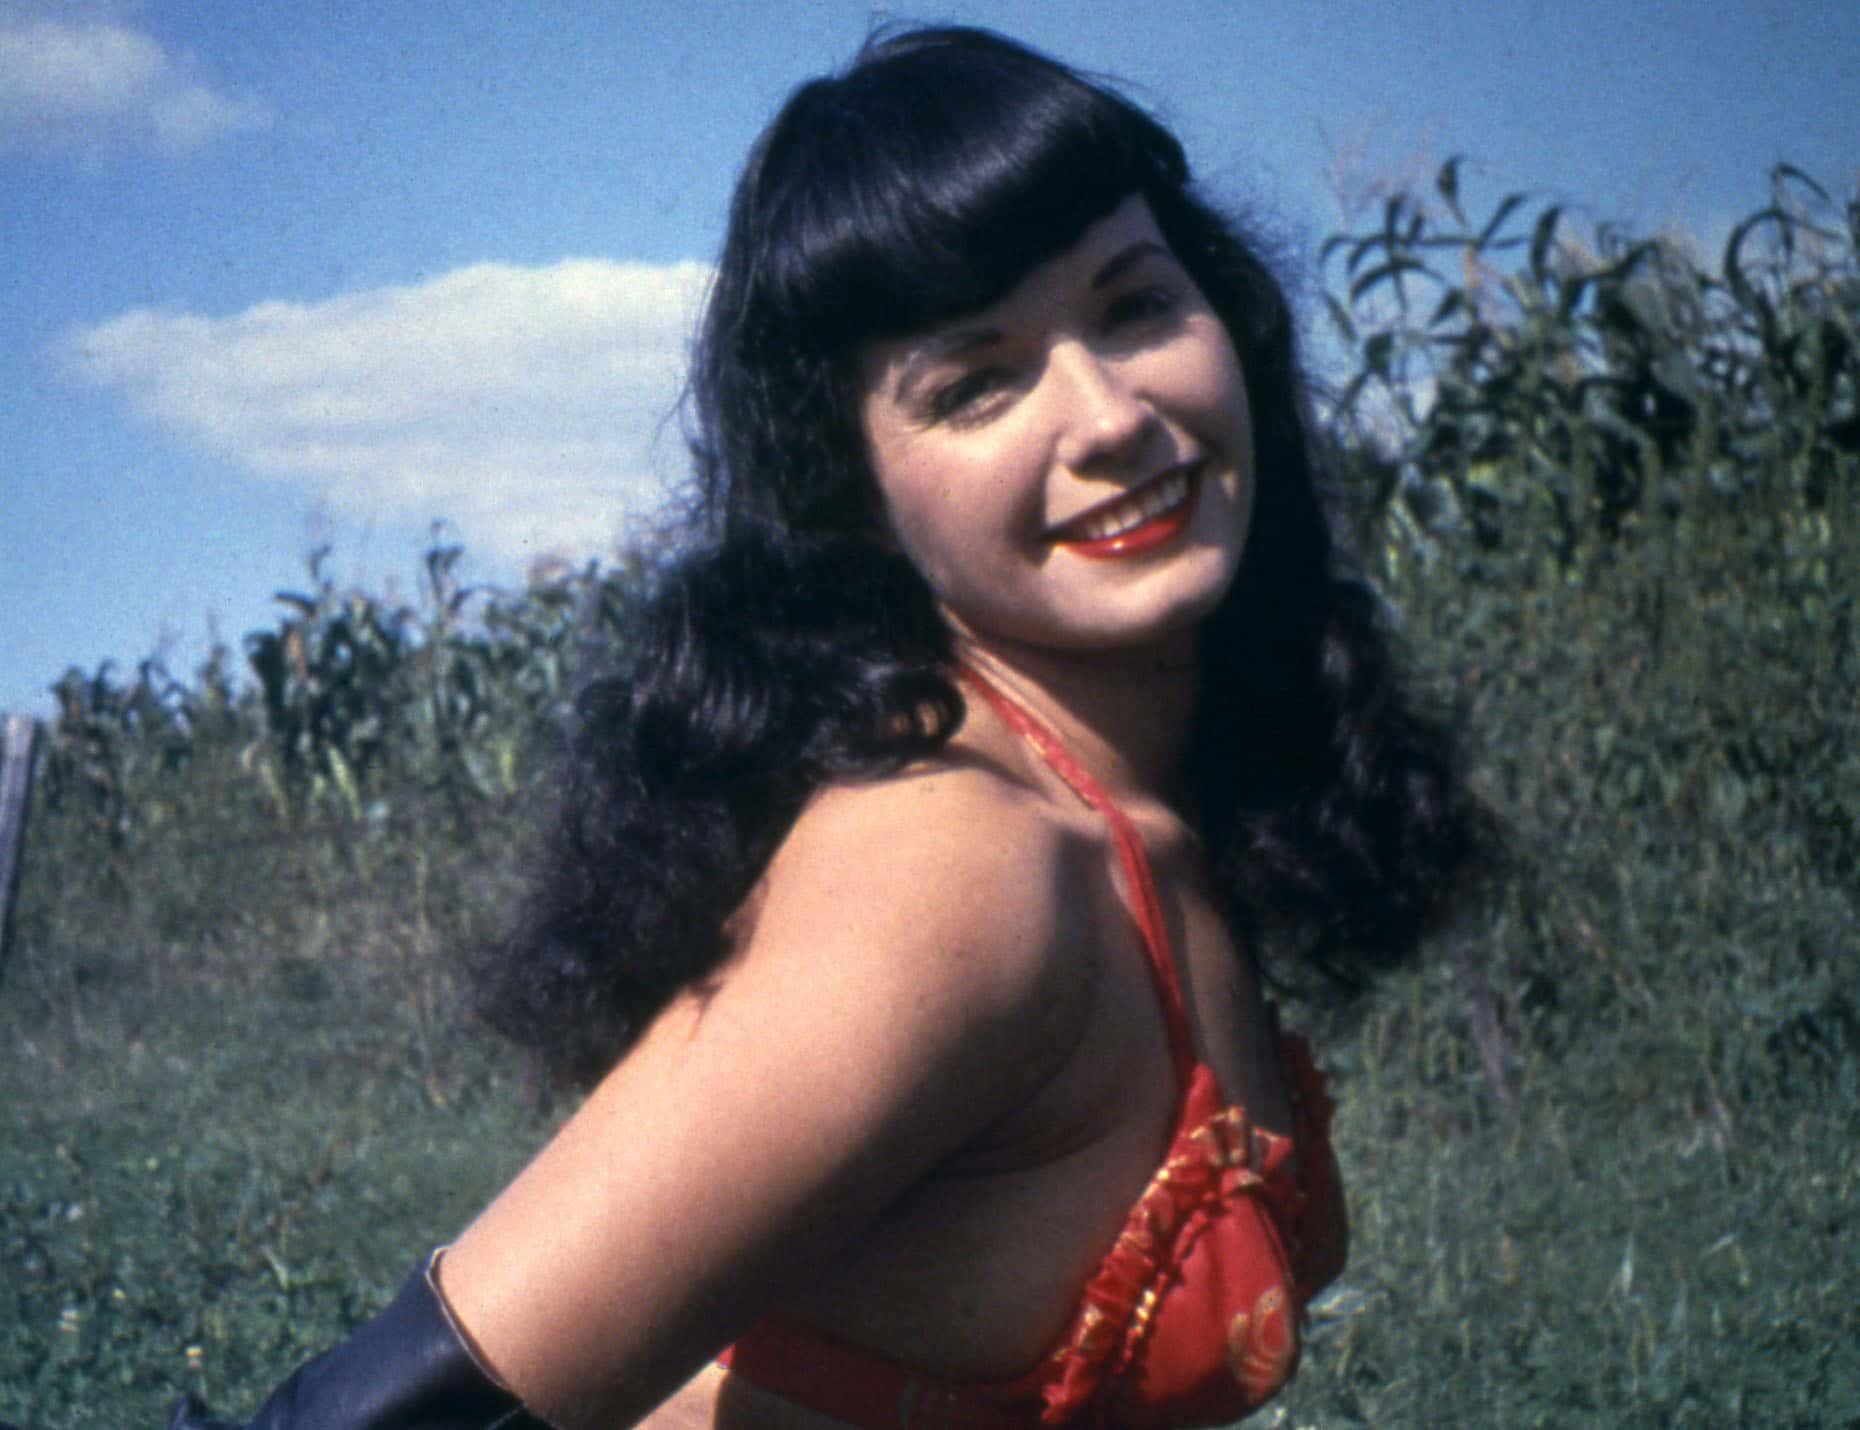 Bettie Page Reveals All' tells the story behind the pinups